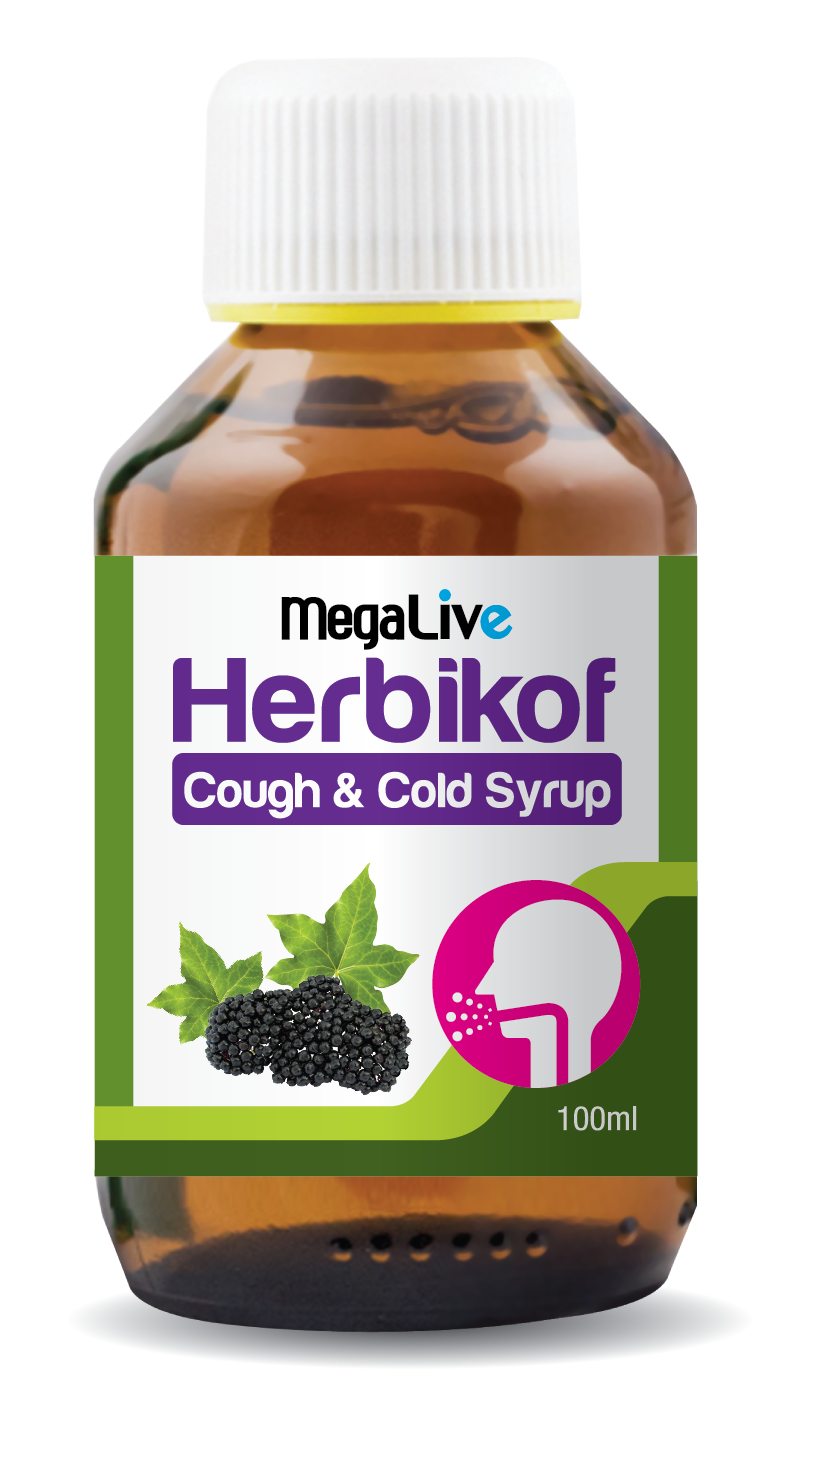 Megalive Herbikof Cough & Cold Syrup 100ml